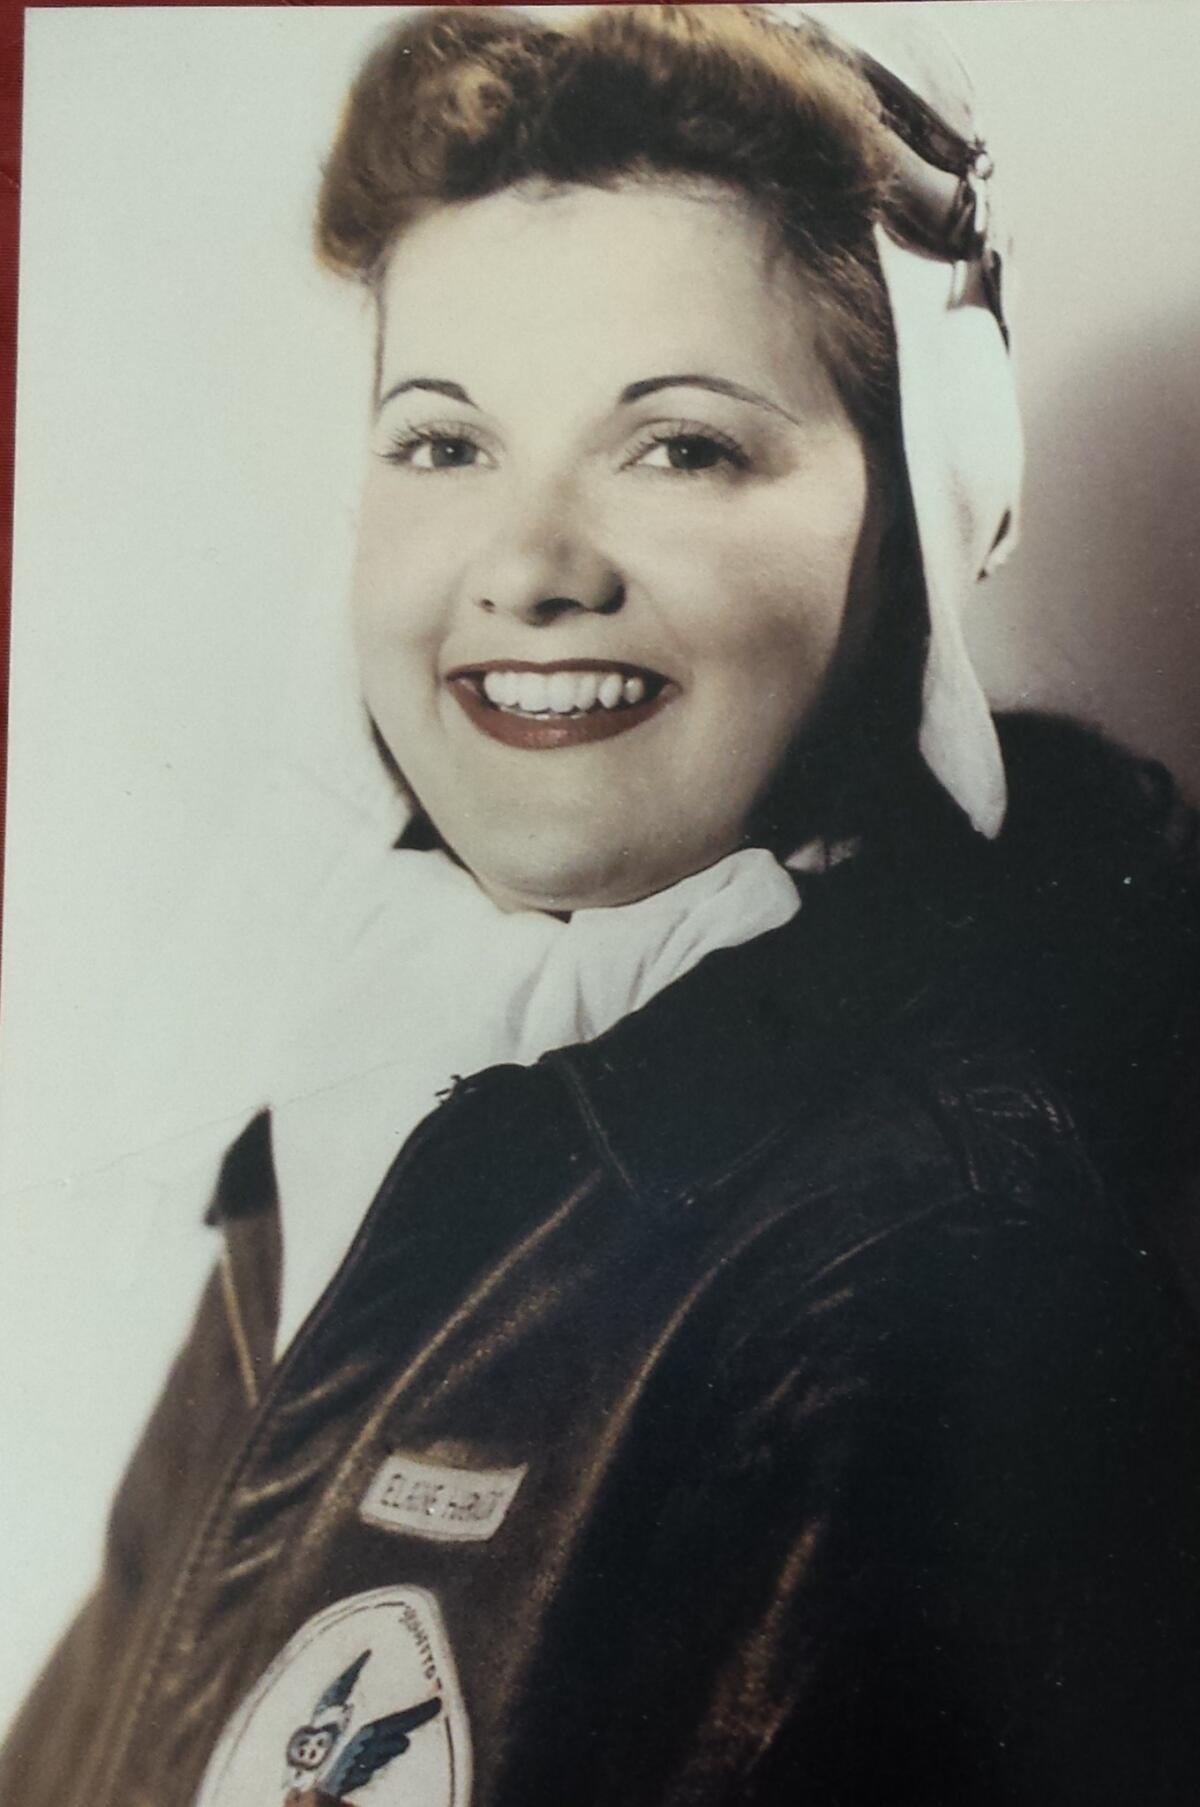 Elaine Harmon was one of more than 1,000 pilots who joined the Women Airforce Service Pilots during World War II.